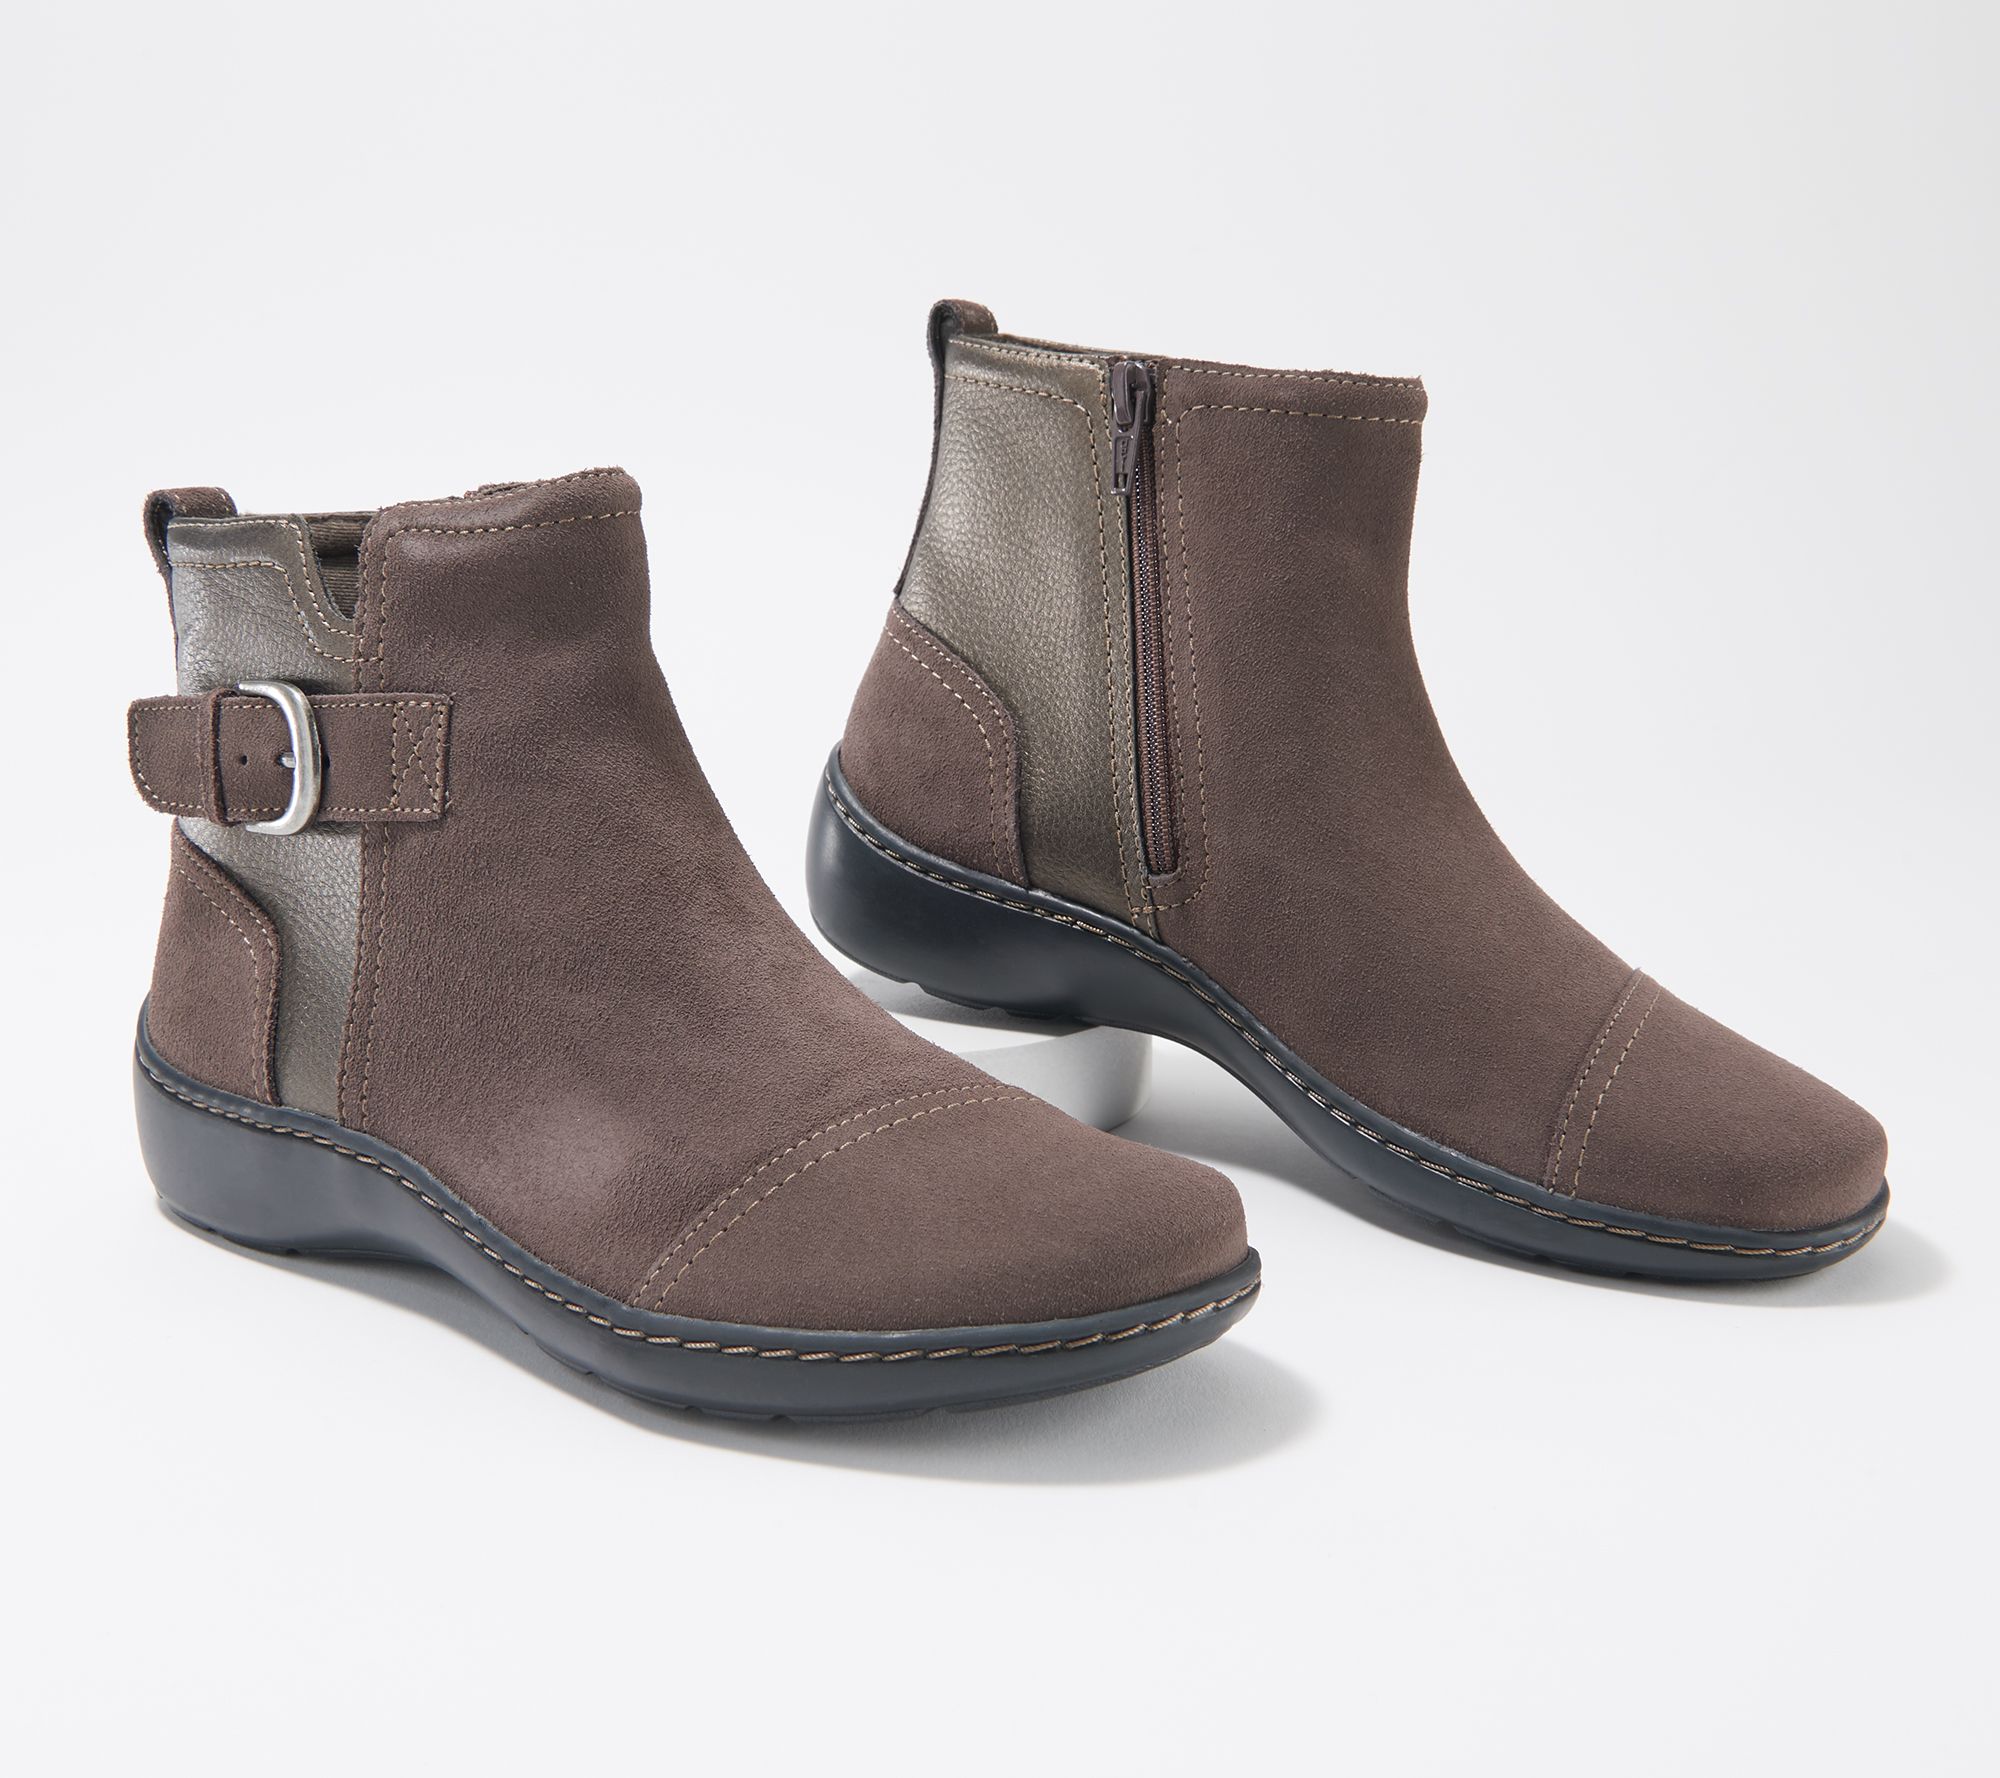 k by clarks ankle boots